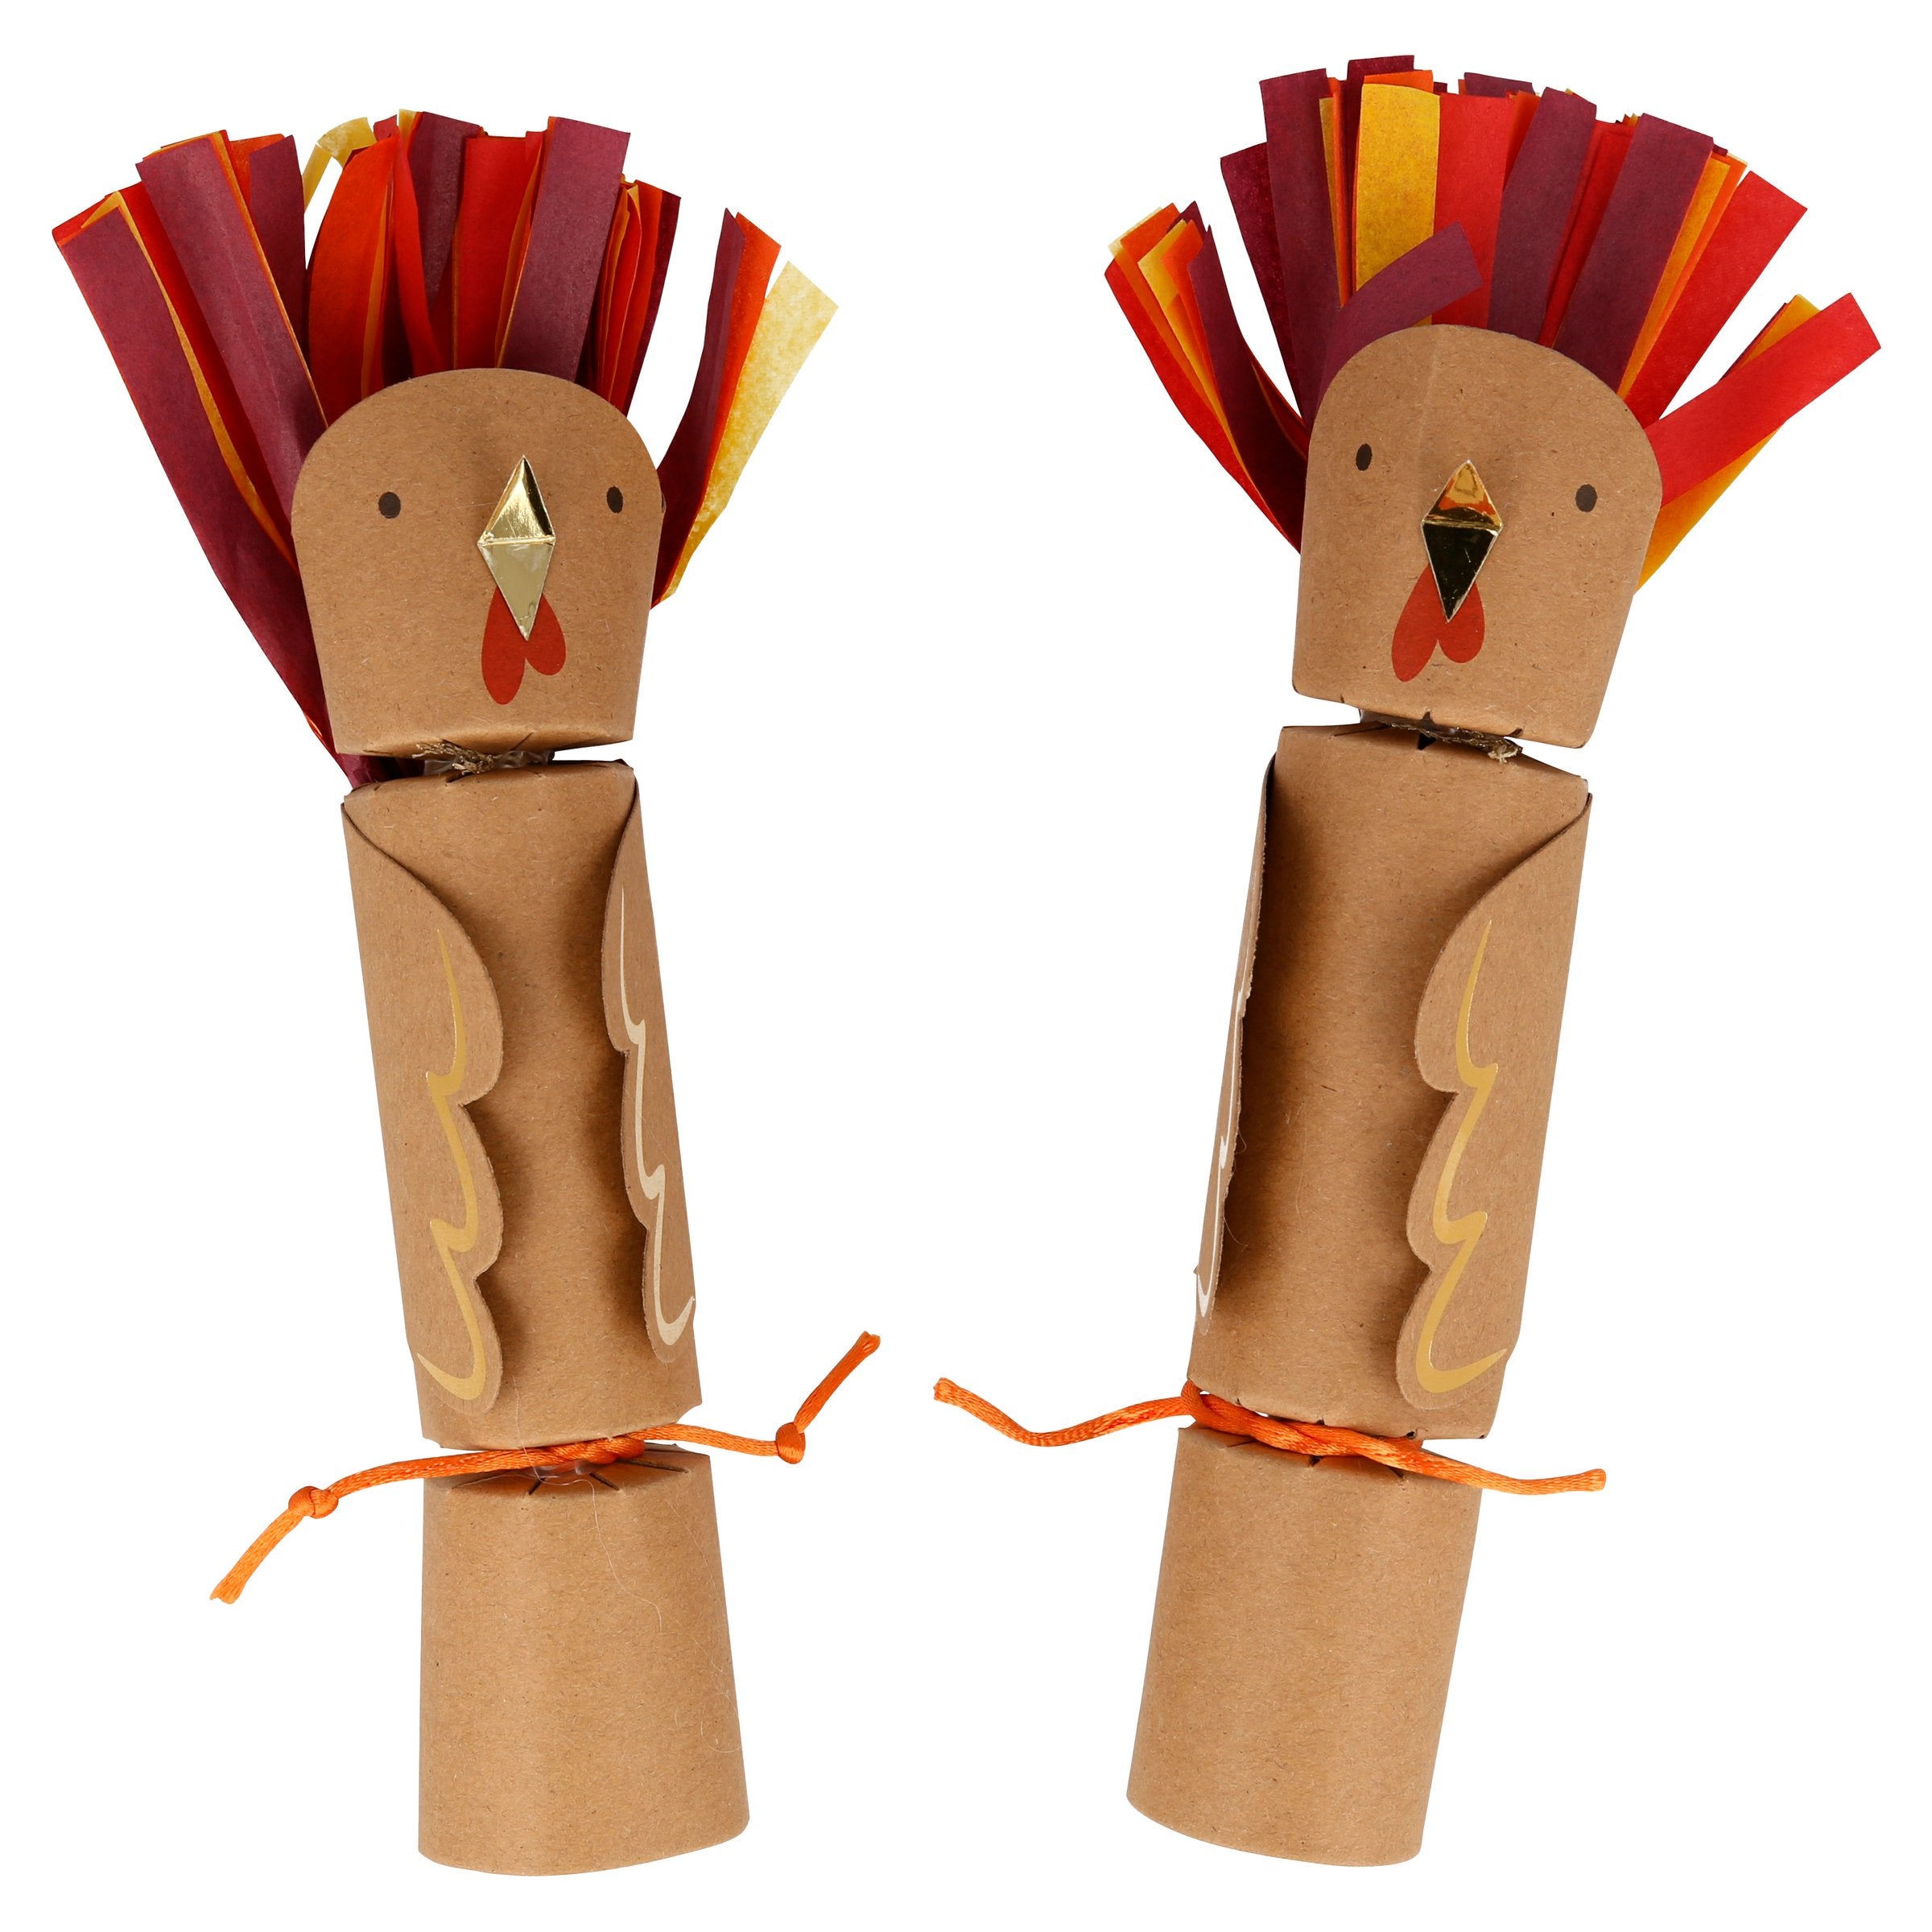 These fun turkey party crackers are perfect as Thanksgiving table decorations.